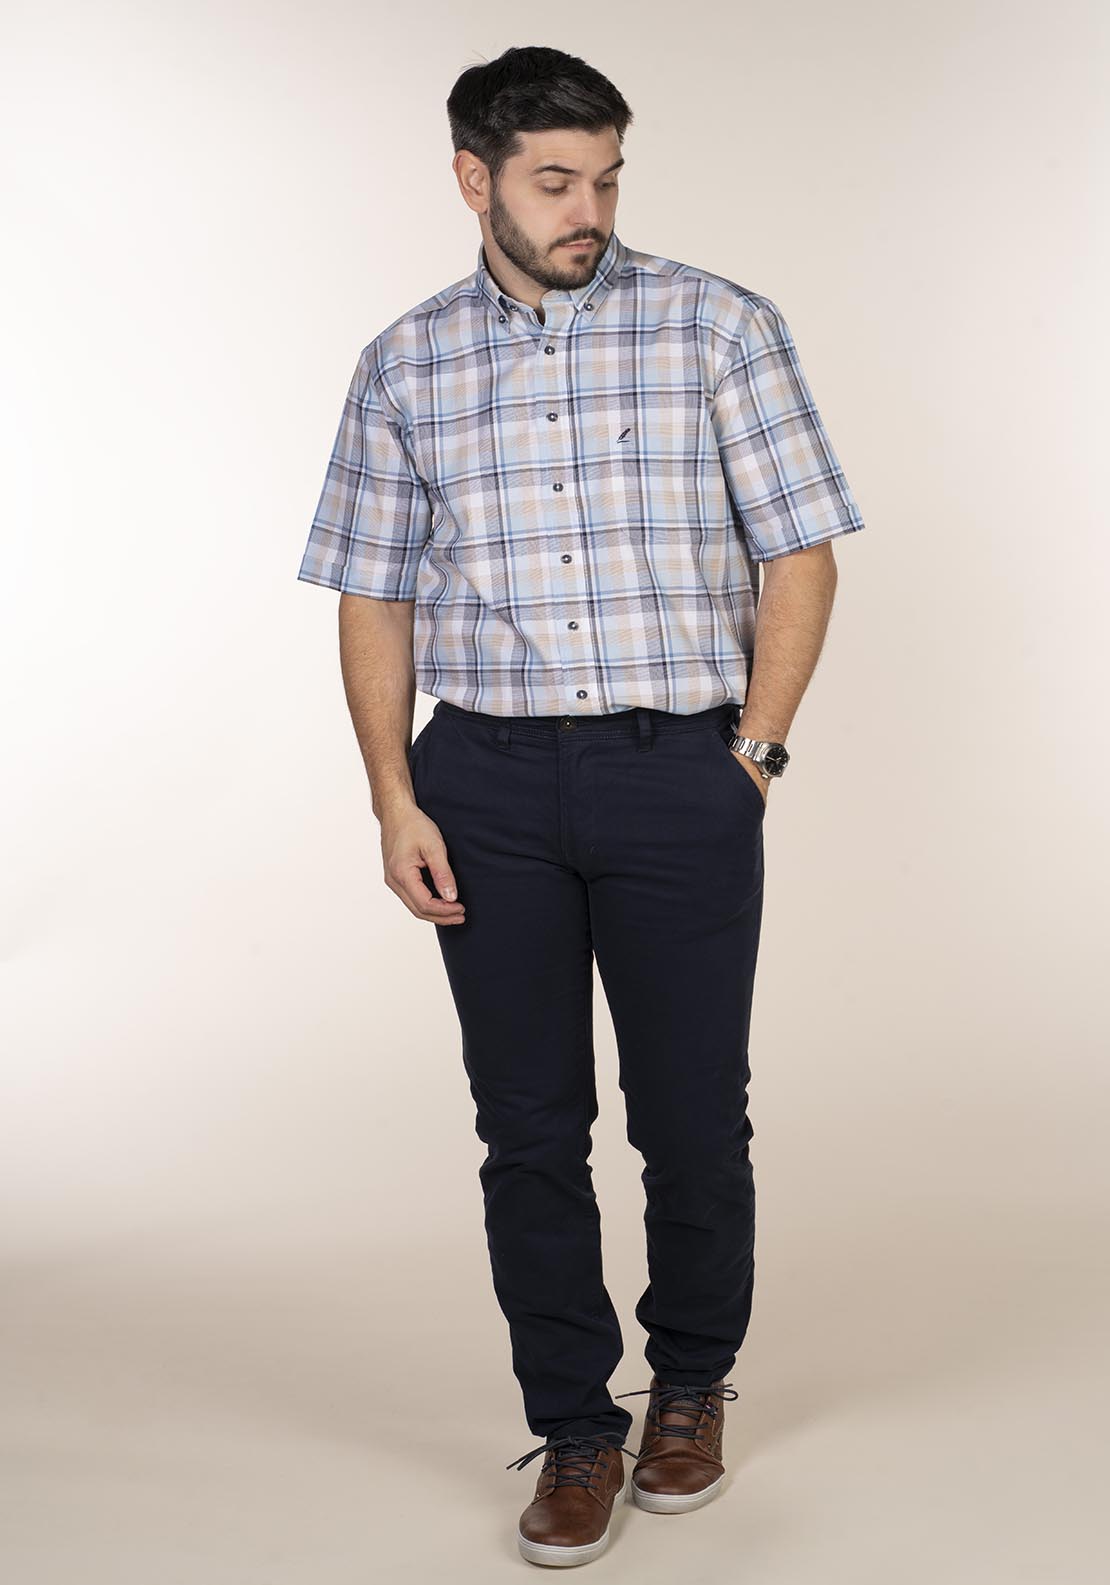 Yeats Casual Check Short Sleeve Shirt - Blue 1 Shaws Department Stores